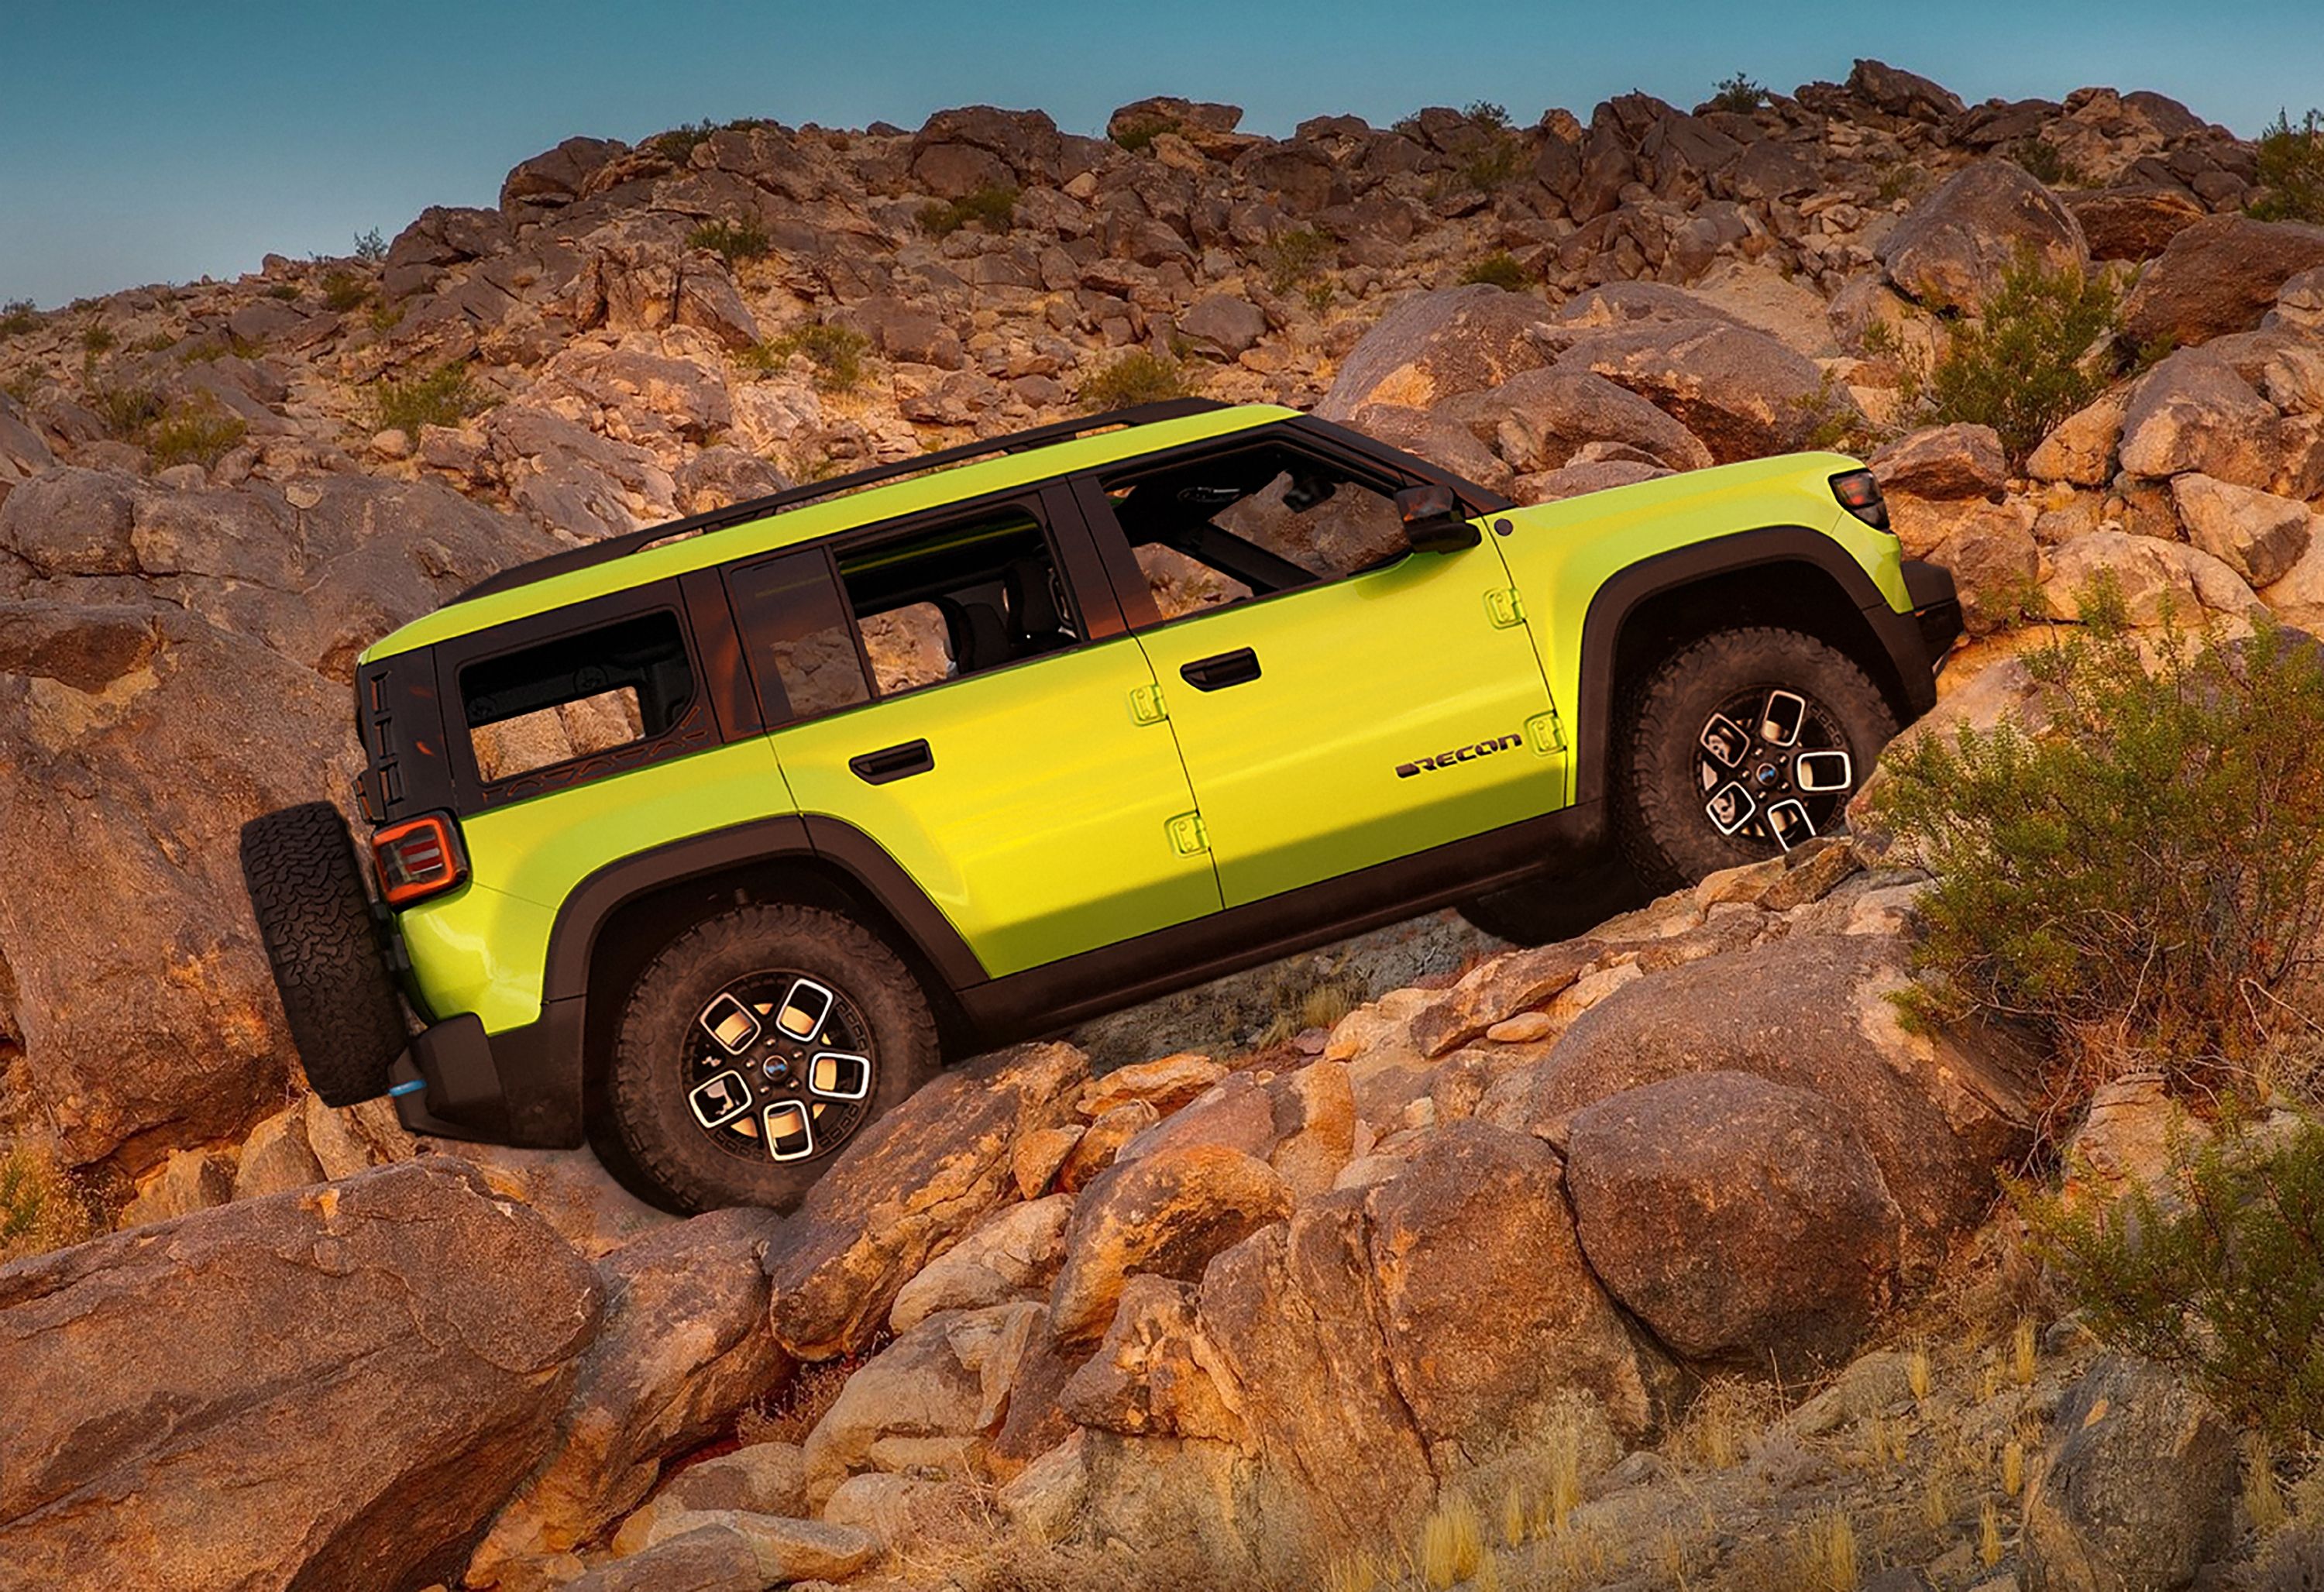 What We Know So Far About The AllElectric Jeep Recon